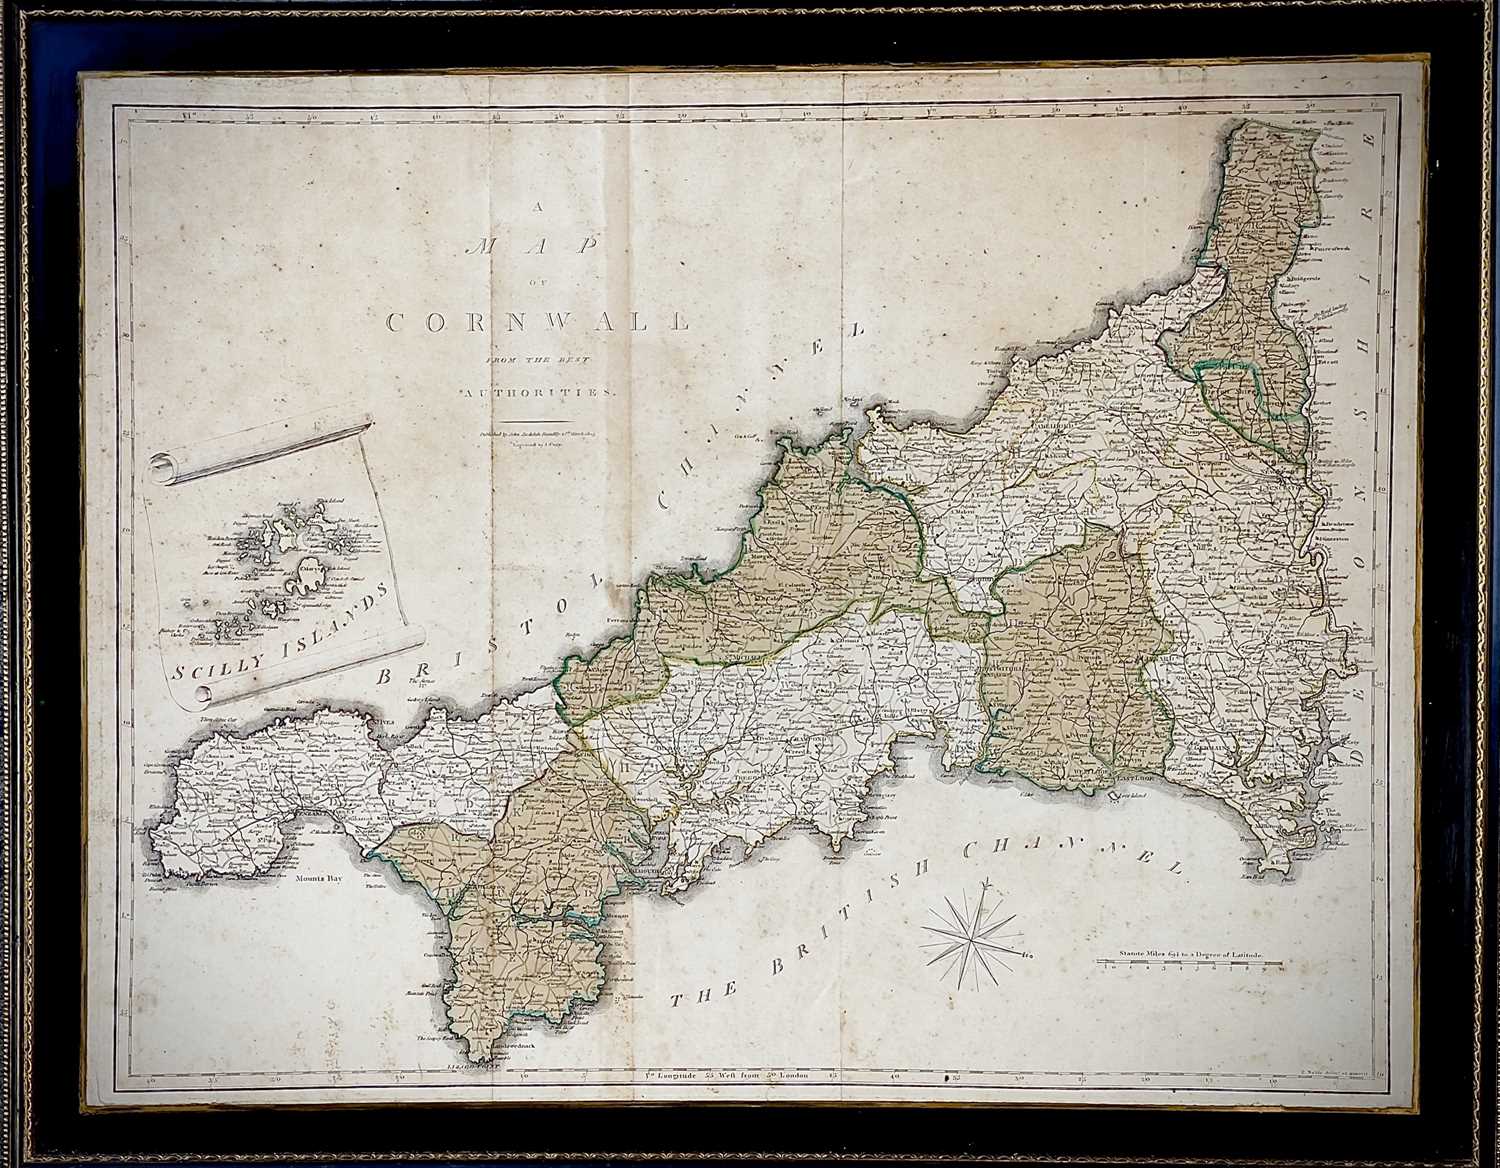 J. CARY. 'A Map of Cornwall from the Best Authorities,' engraved map, published for Camden's - Image 2 of 3